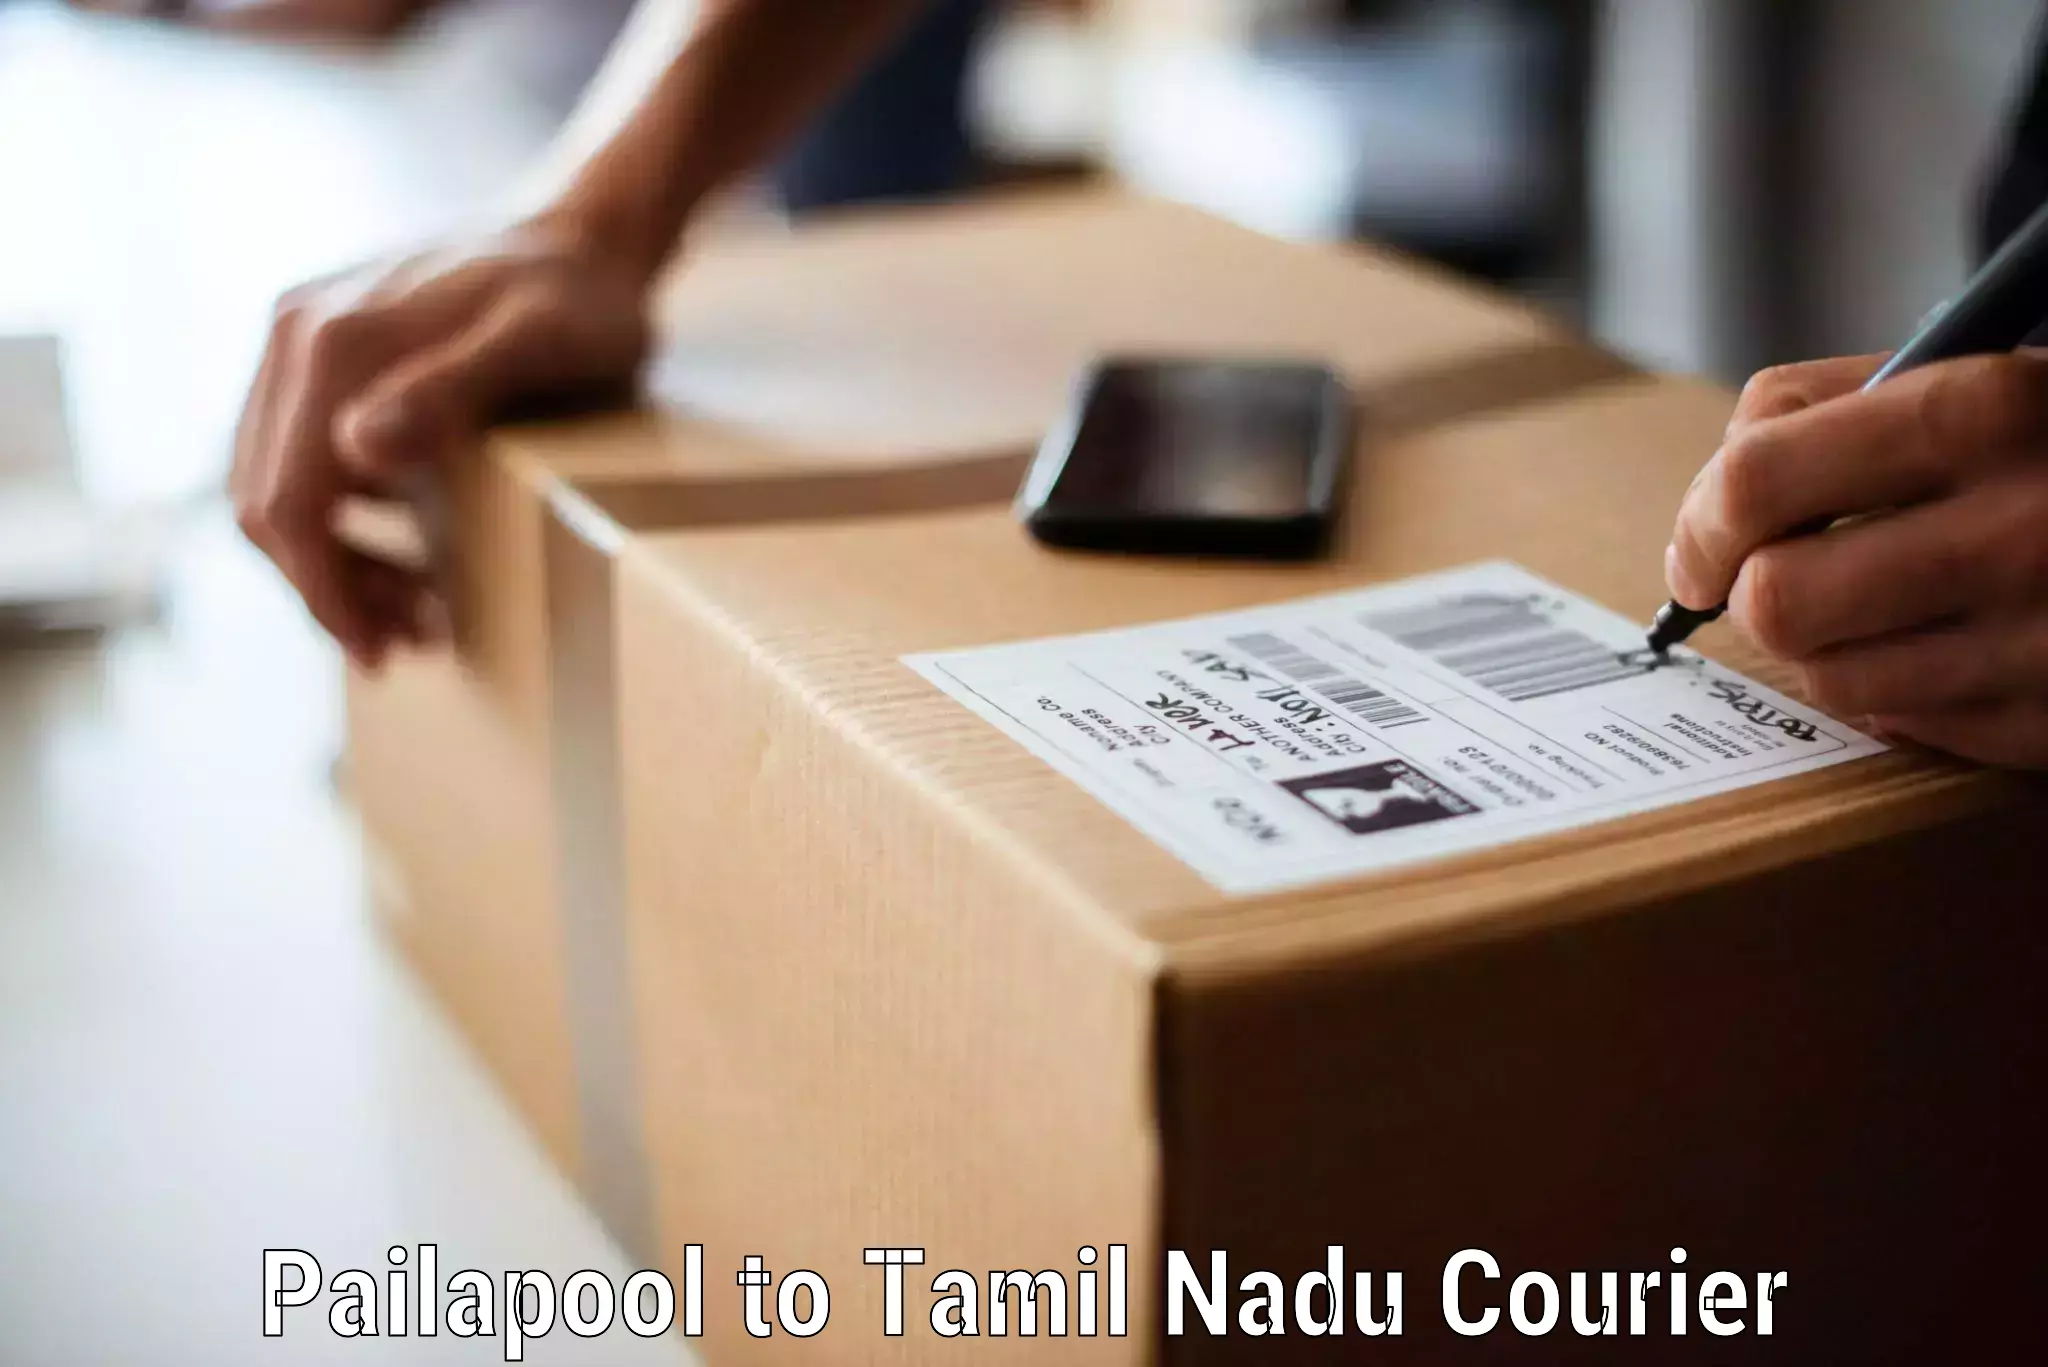 Furniture transport professionals Pailapool to Vellore Institute of Technology